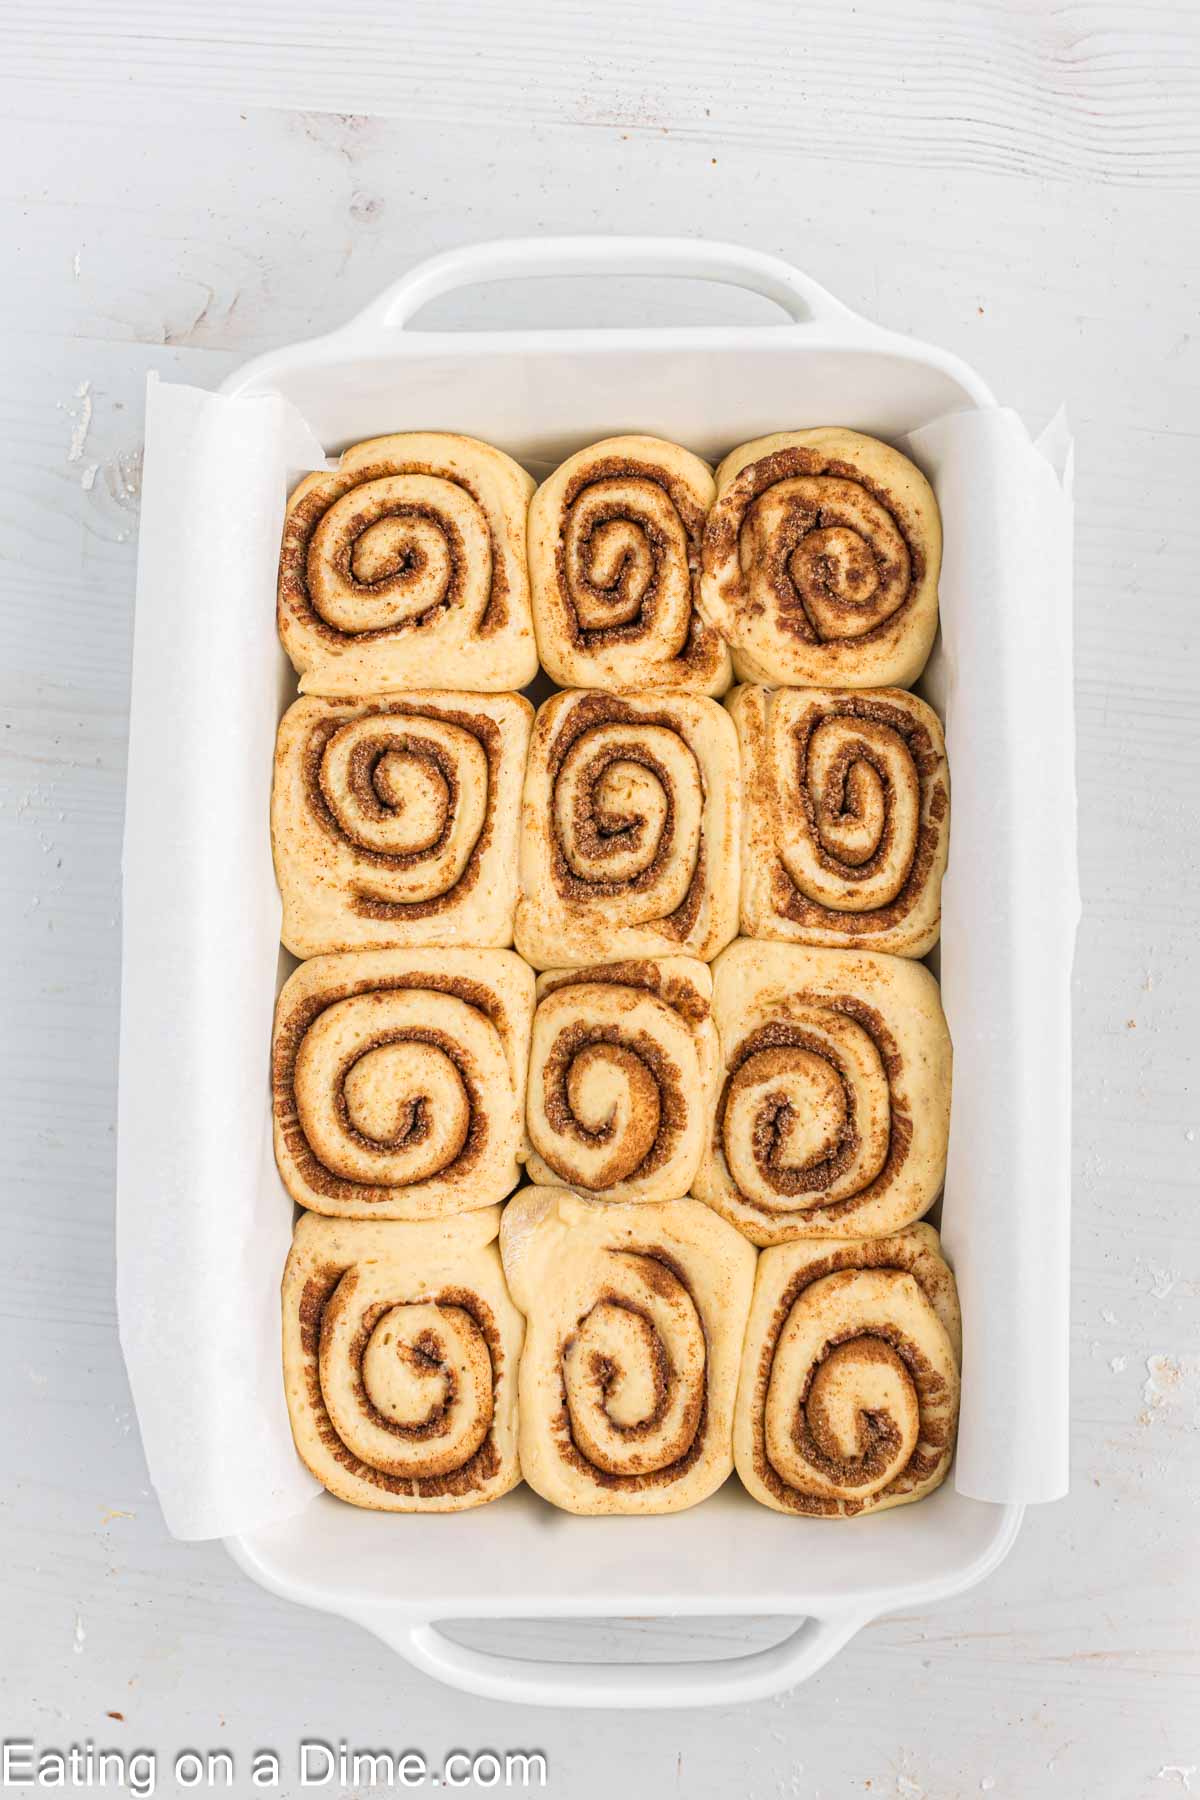 Allowing the cinnamon roll dough to double in size in a baking dish